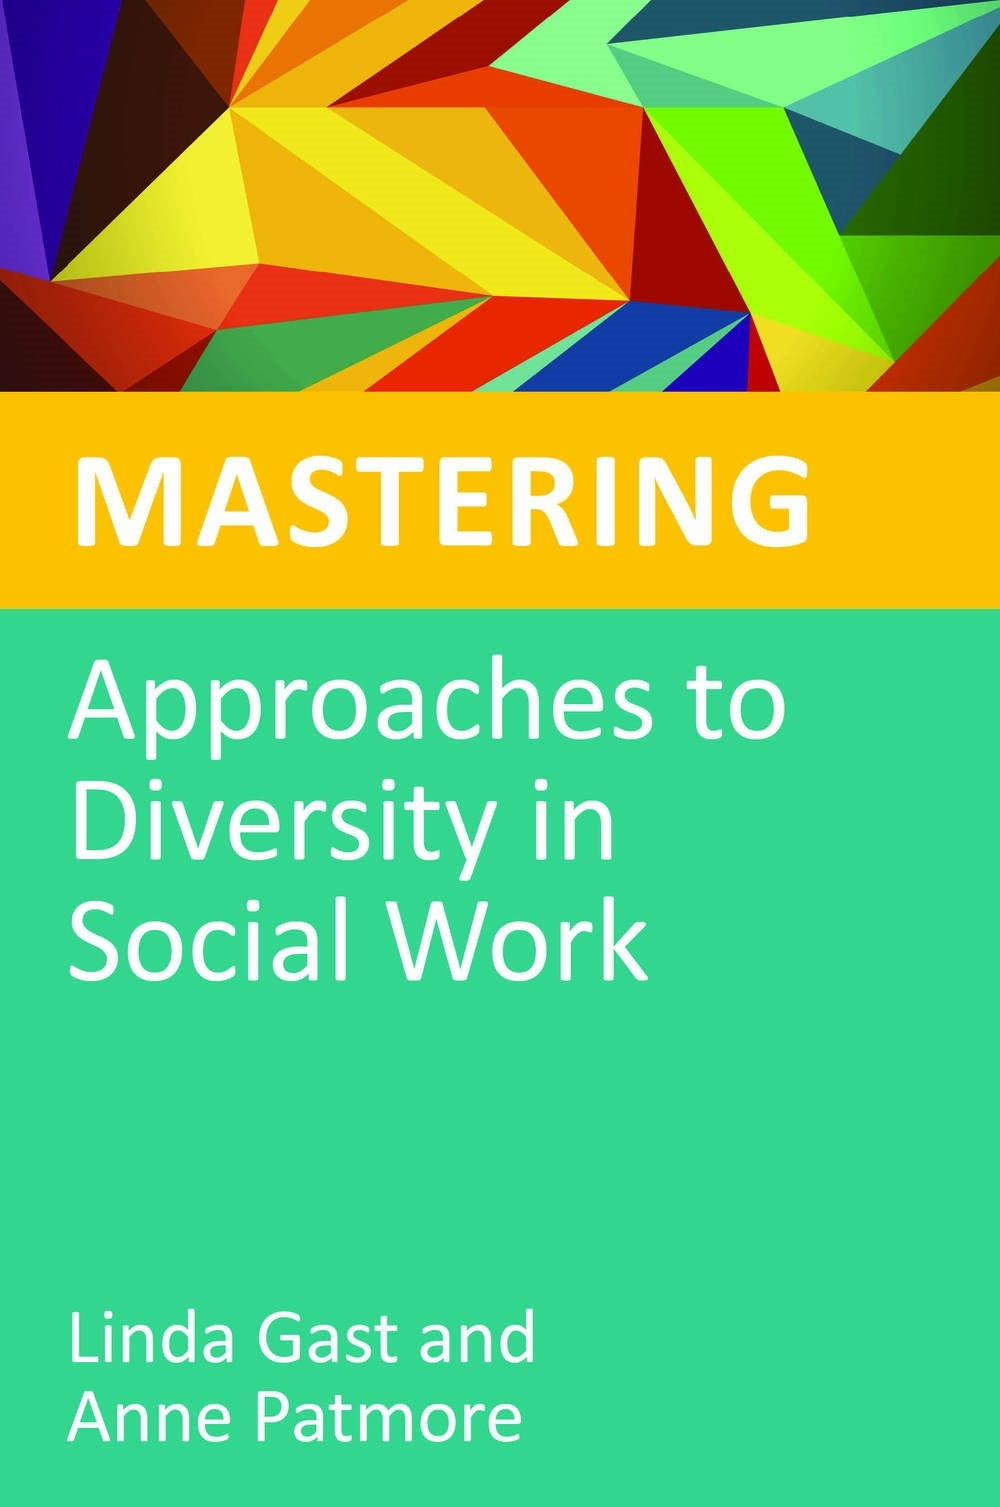 Mastering Approaches to Diversity in Social Work by Jane Wonnacott, Linda Gast, Anne Patmore